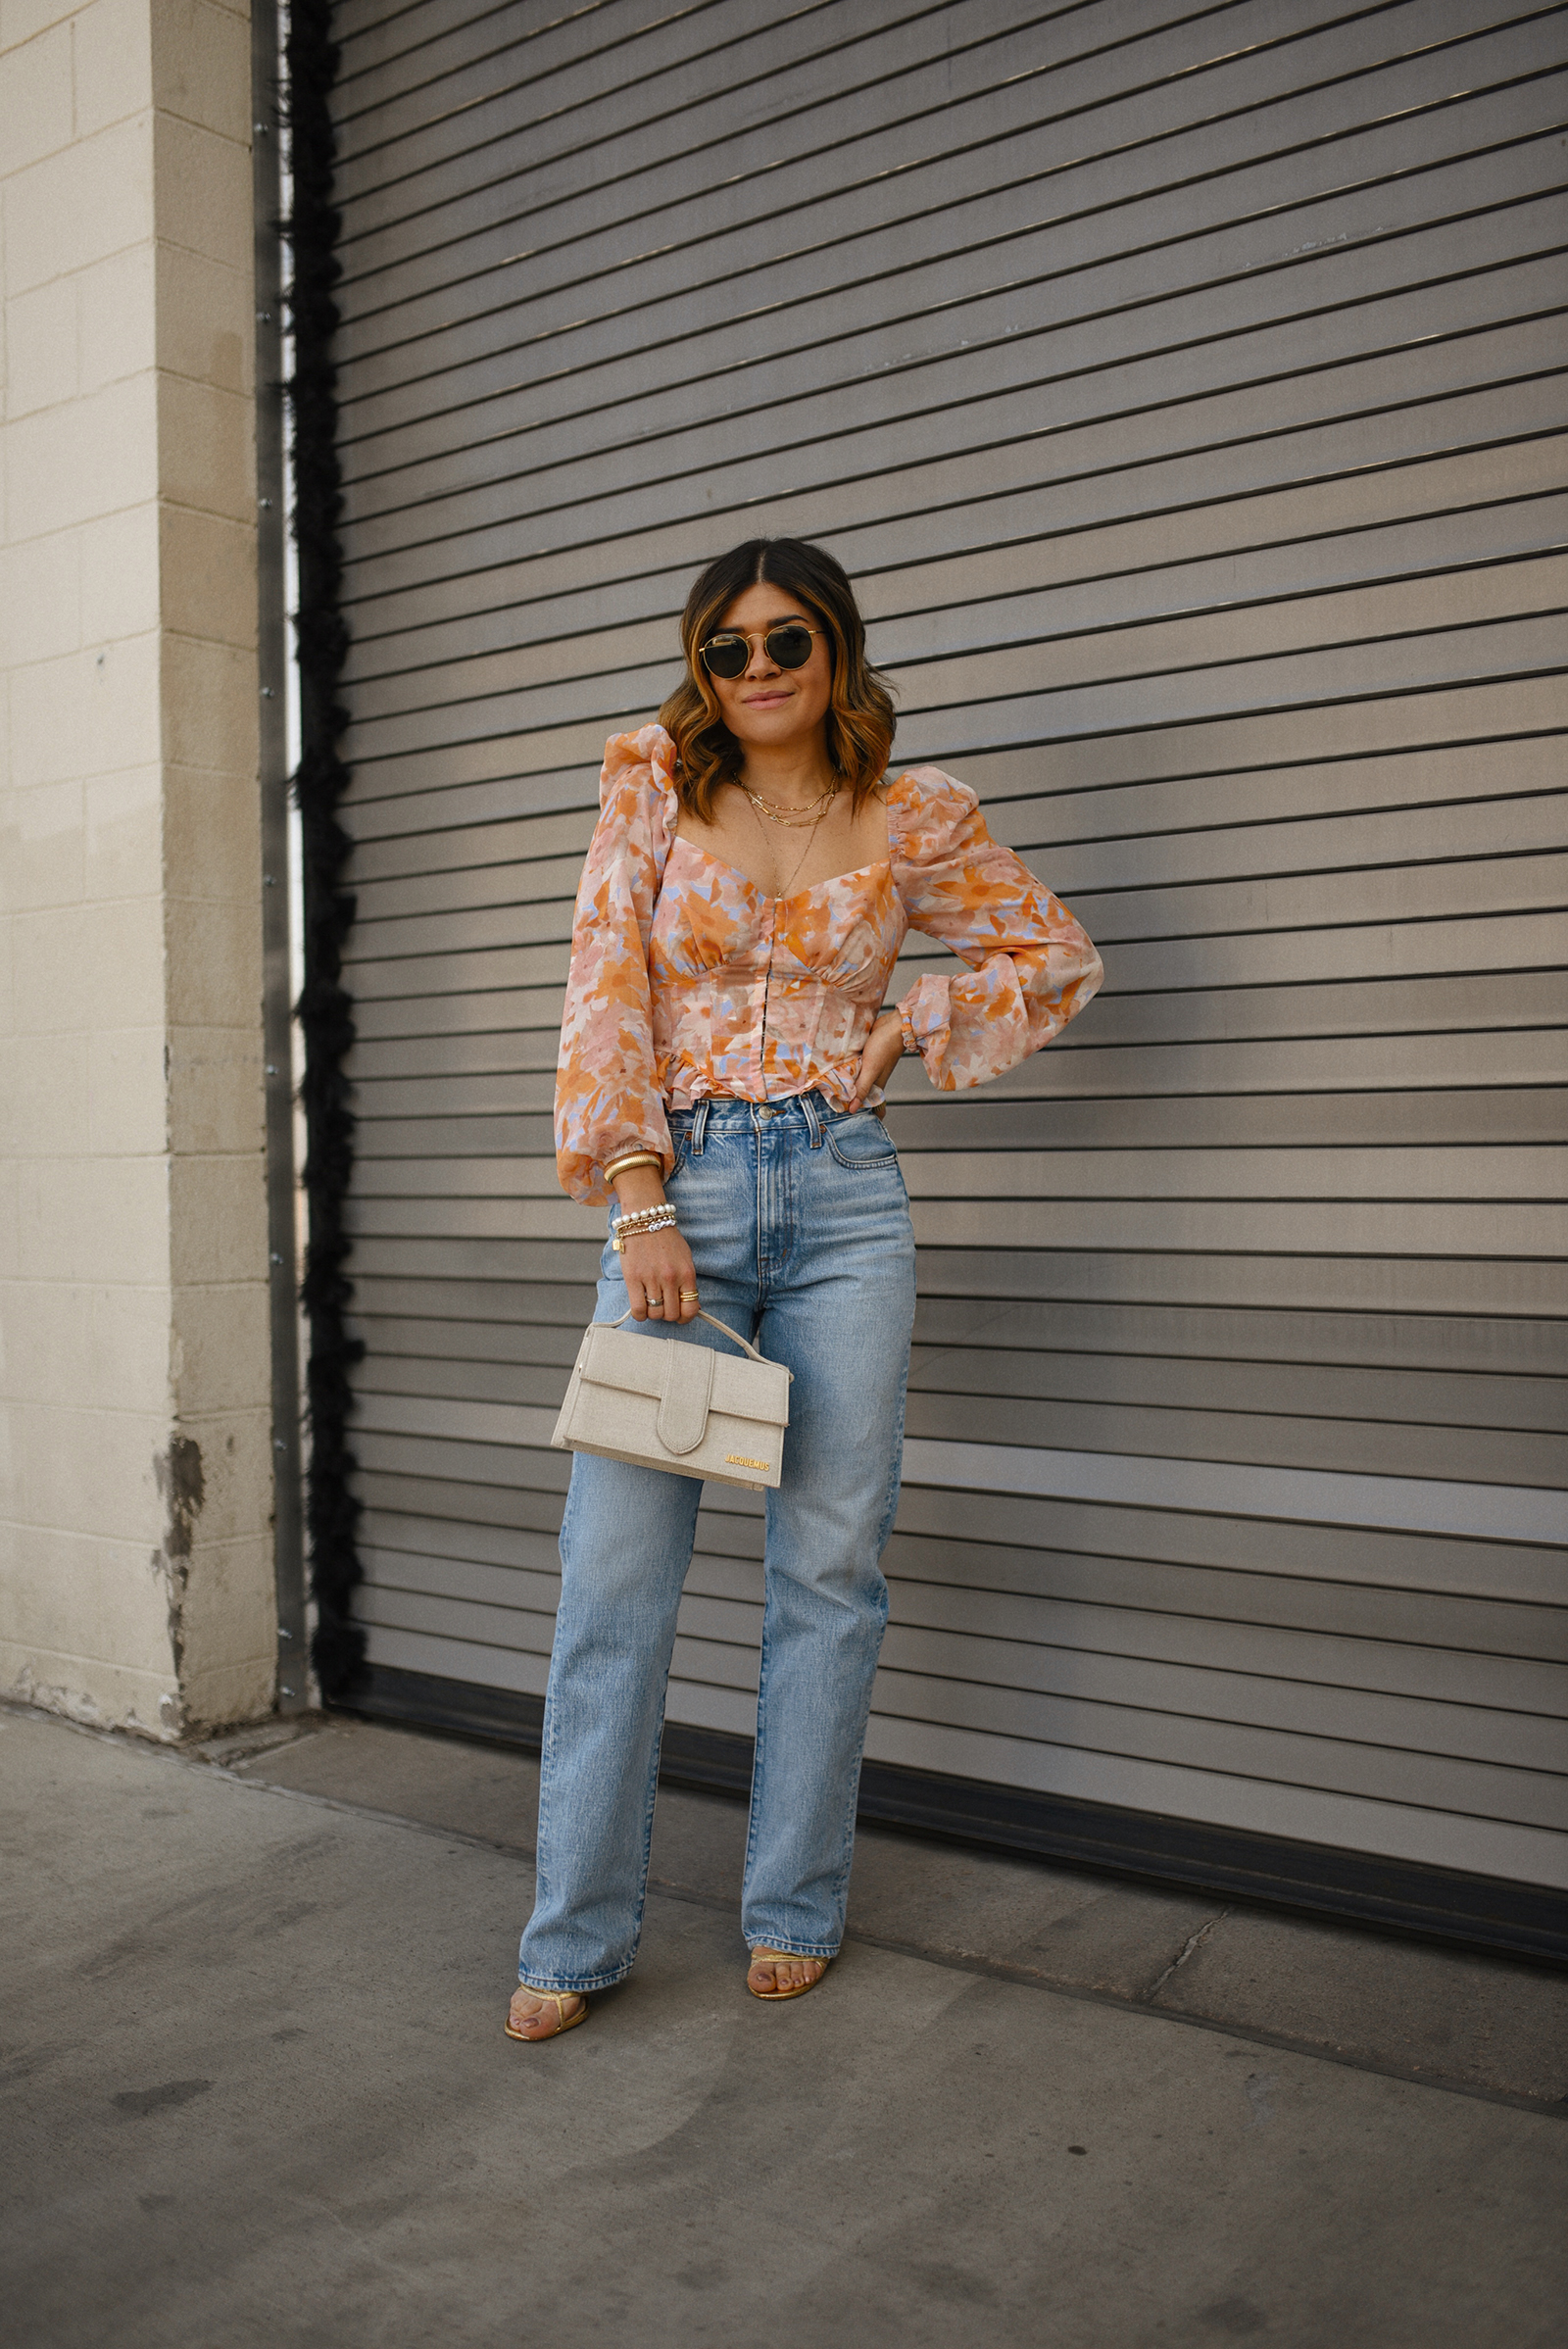 Carolina Hellal of Chic Talk wearing a ASTR The Label top, a Madewell straight jean, a Steve Madden heels sandals and Le bambino bag via Jacquemus